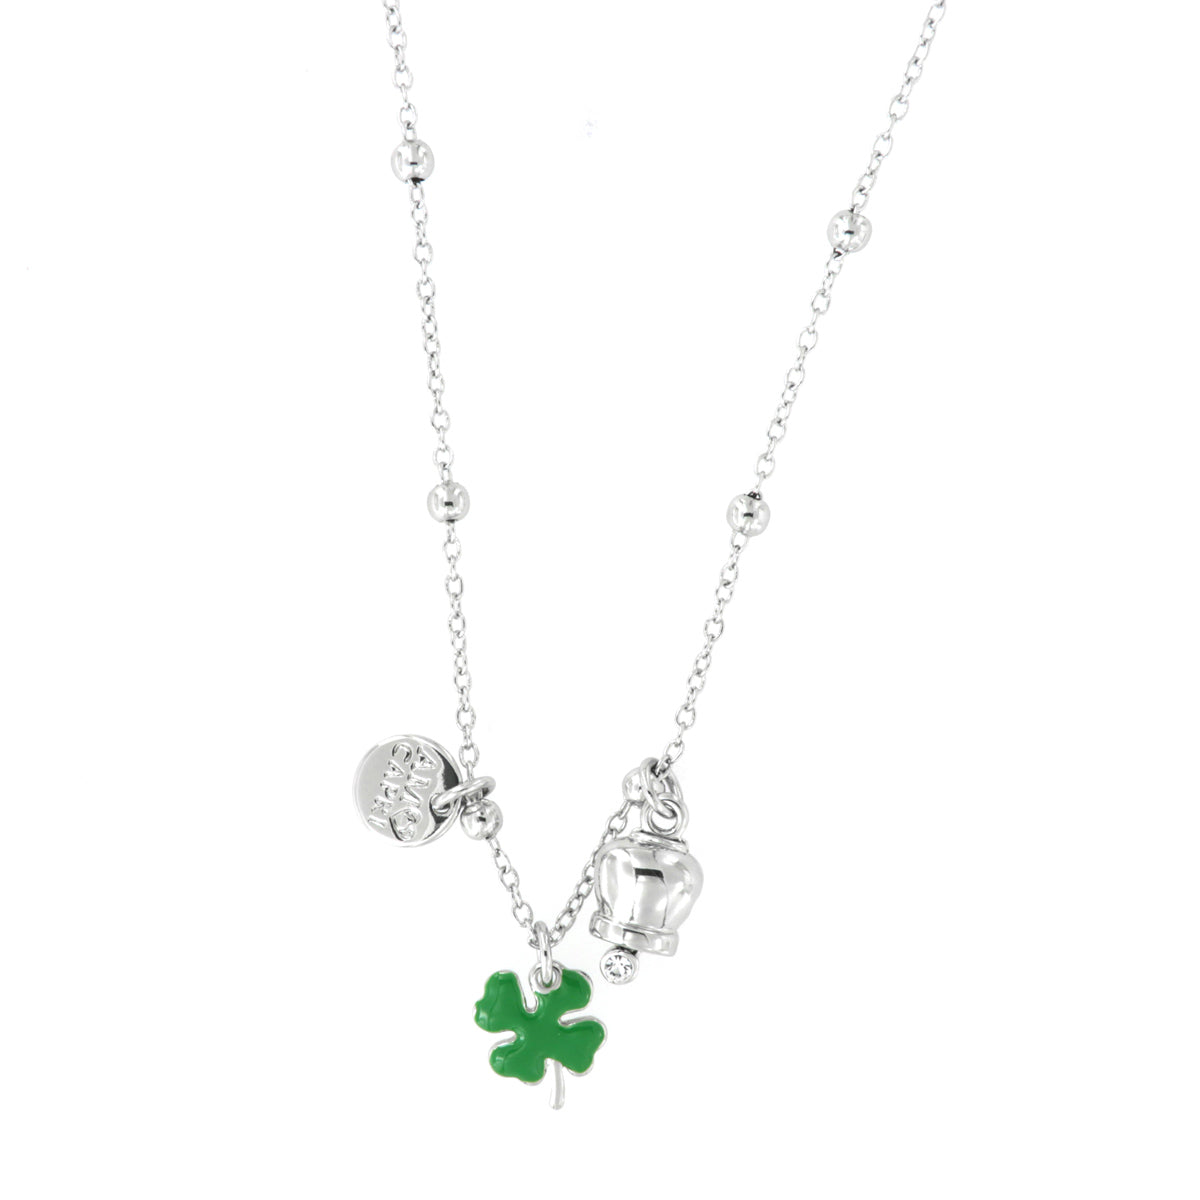 Metal necklace with four -leaf clover pending in green enamel and white bell pendant